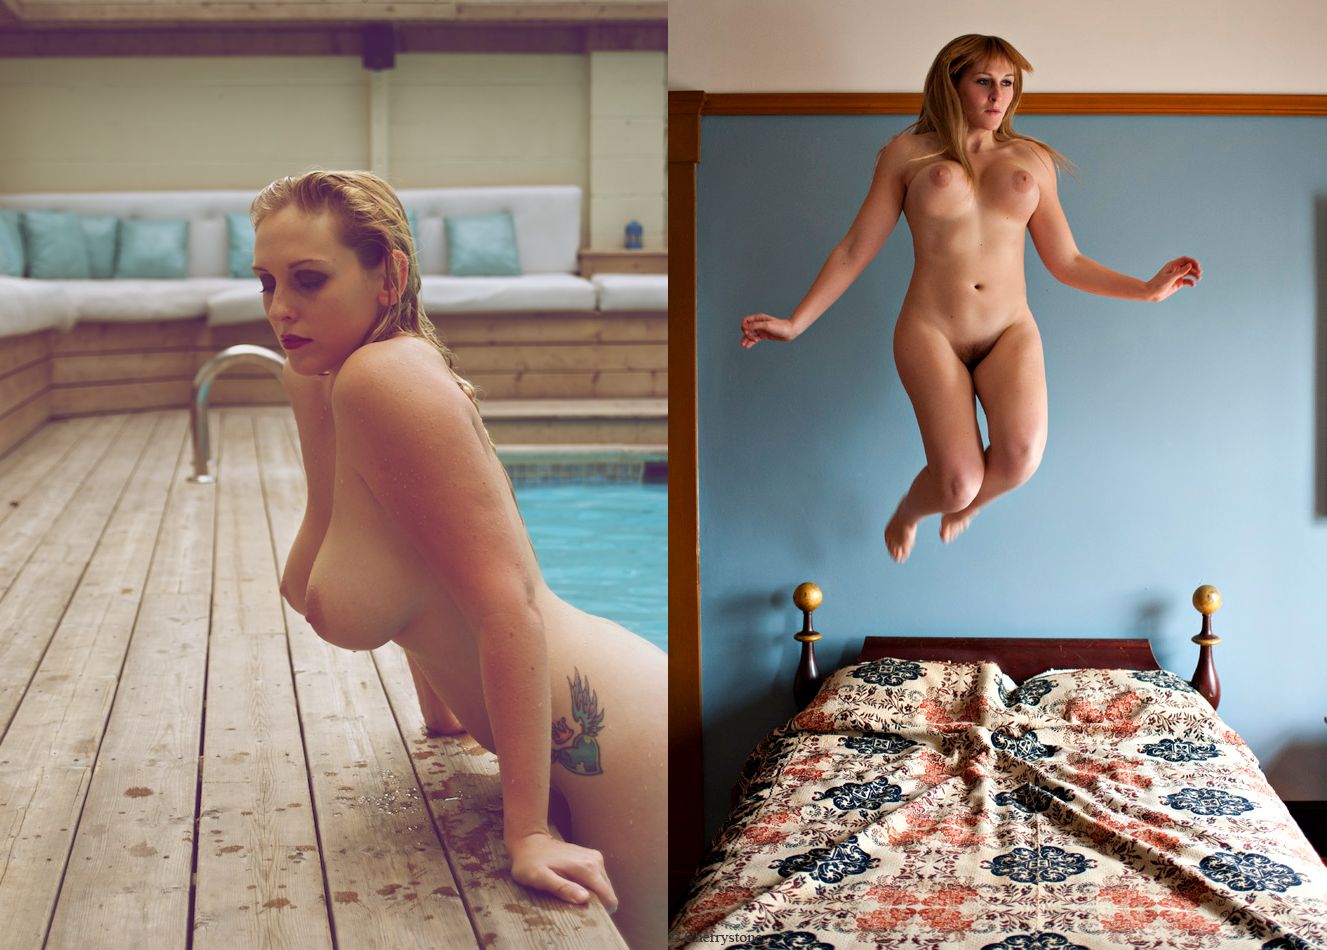 Nicole Nudes is a Canadian model who poses for nude photography. 